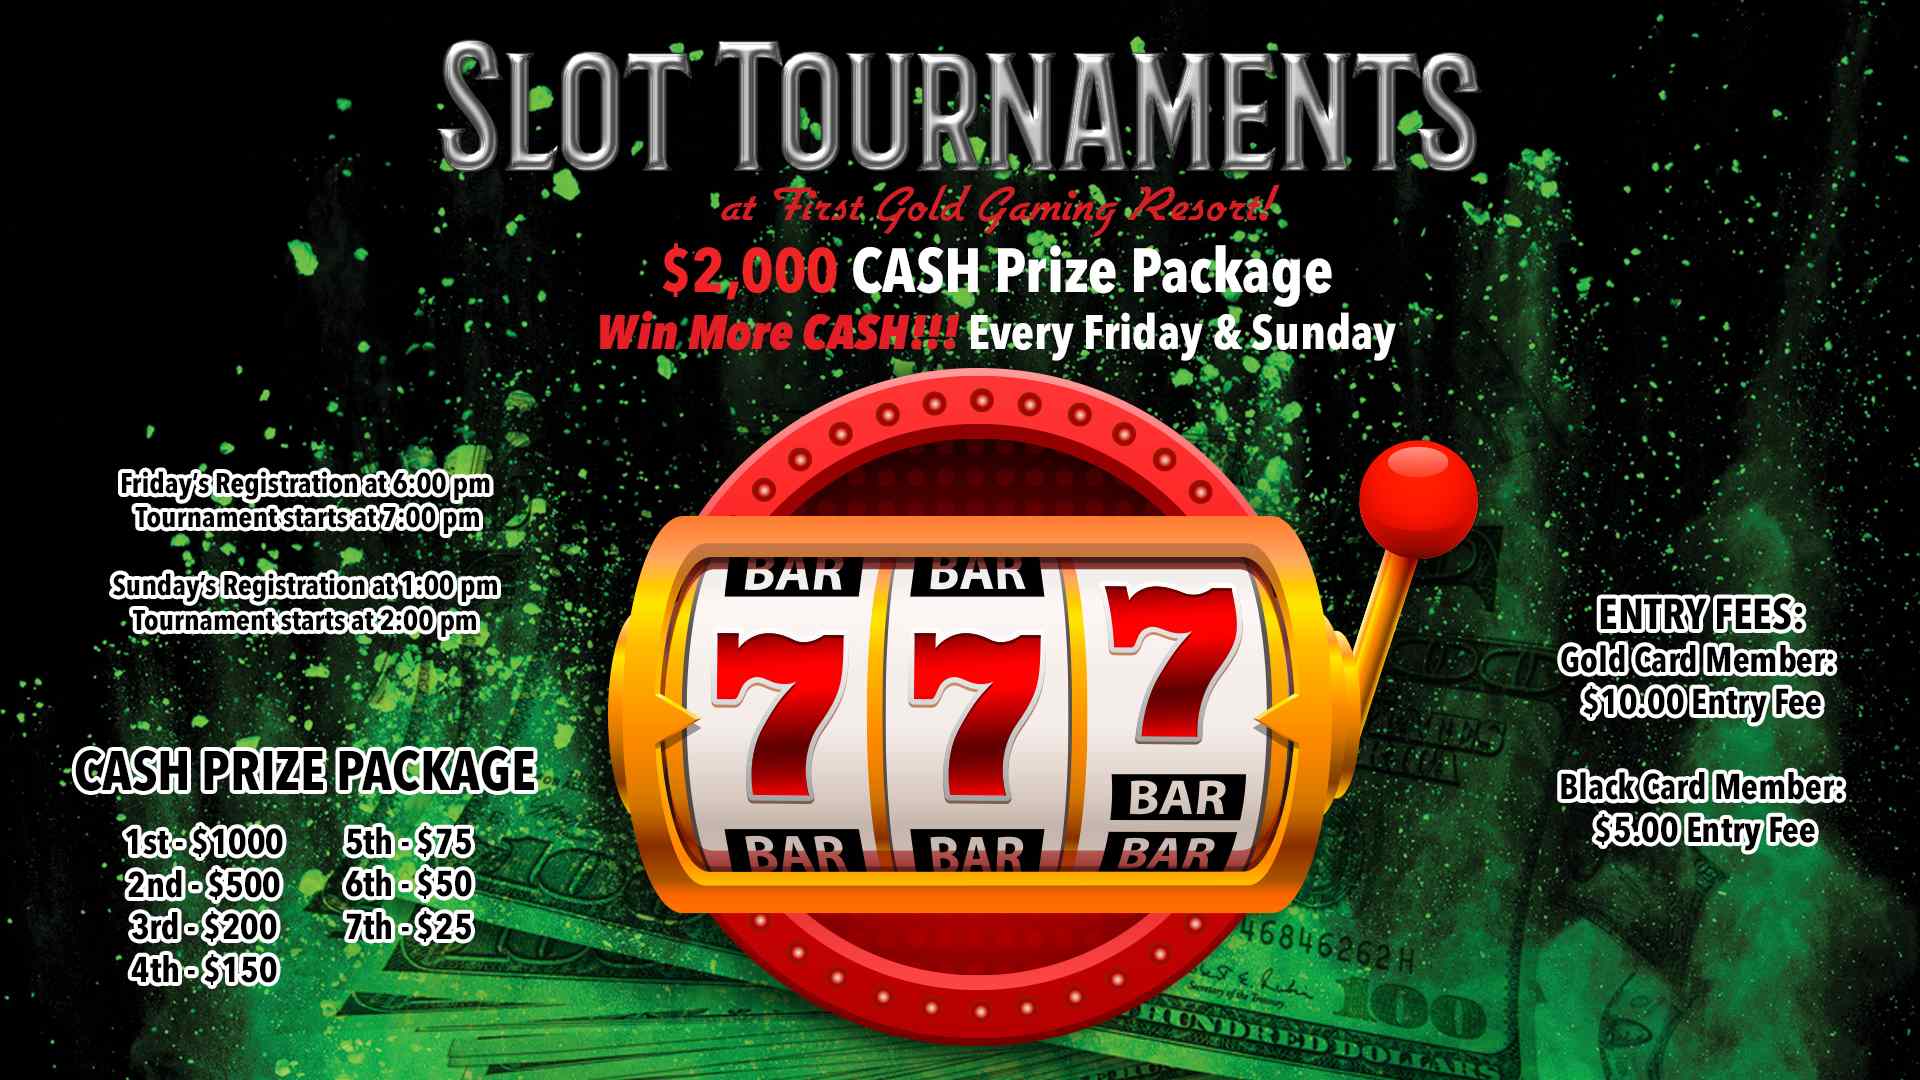 Slot Tournaments Every Friday & Sunday! Promotions First Gold